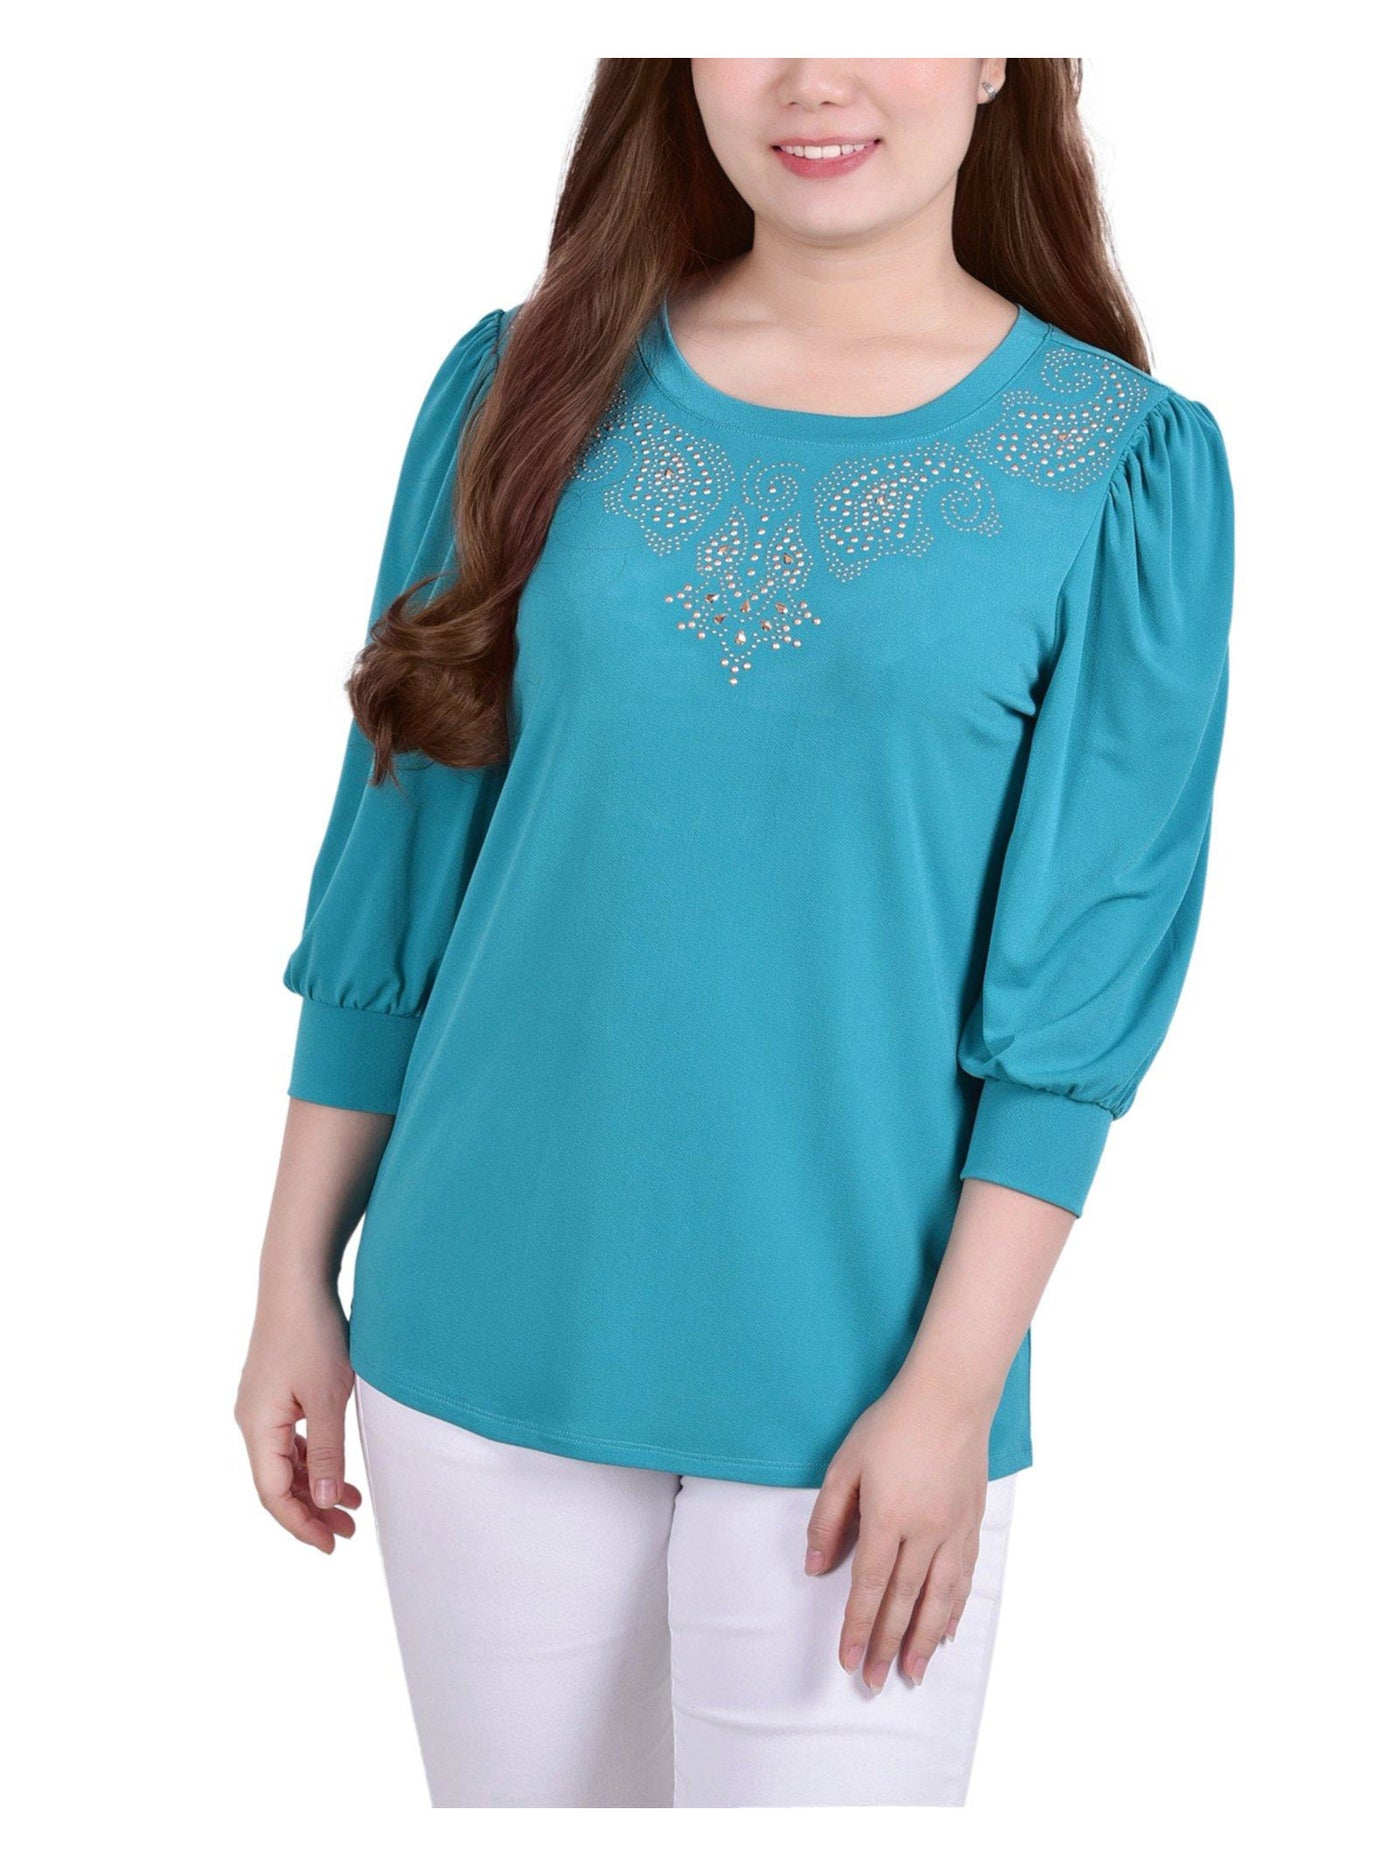 NOTATIONS Womens Teal Embellished Elbow Sleeve Scoop Neck Wear To Work Top Petites PL